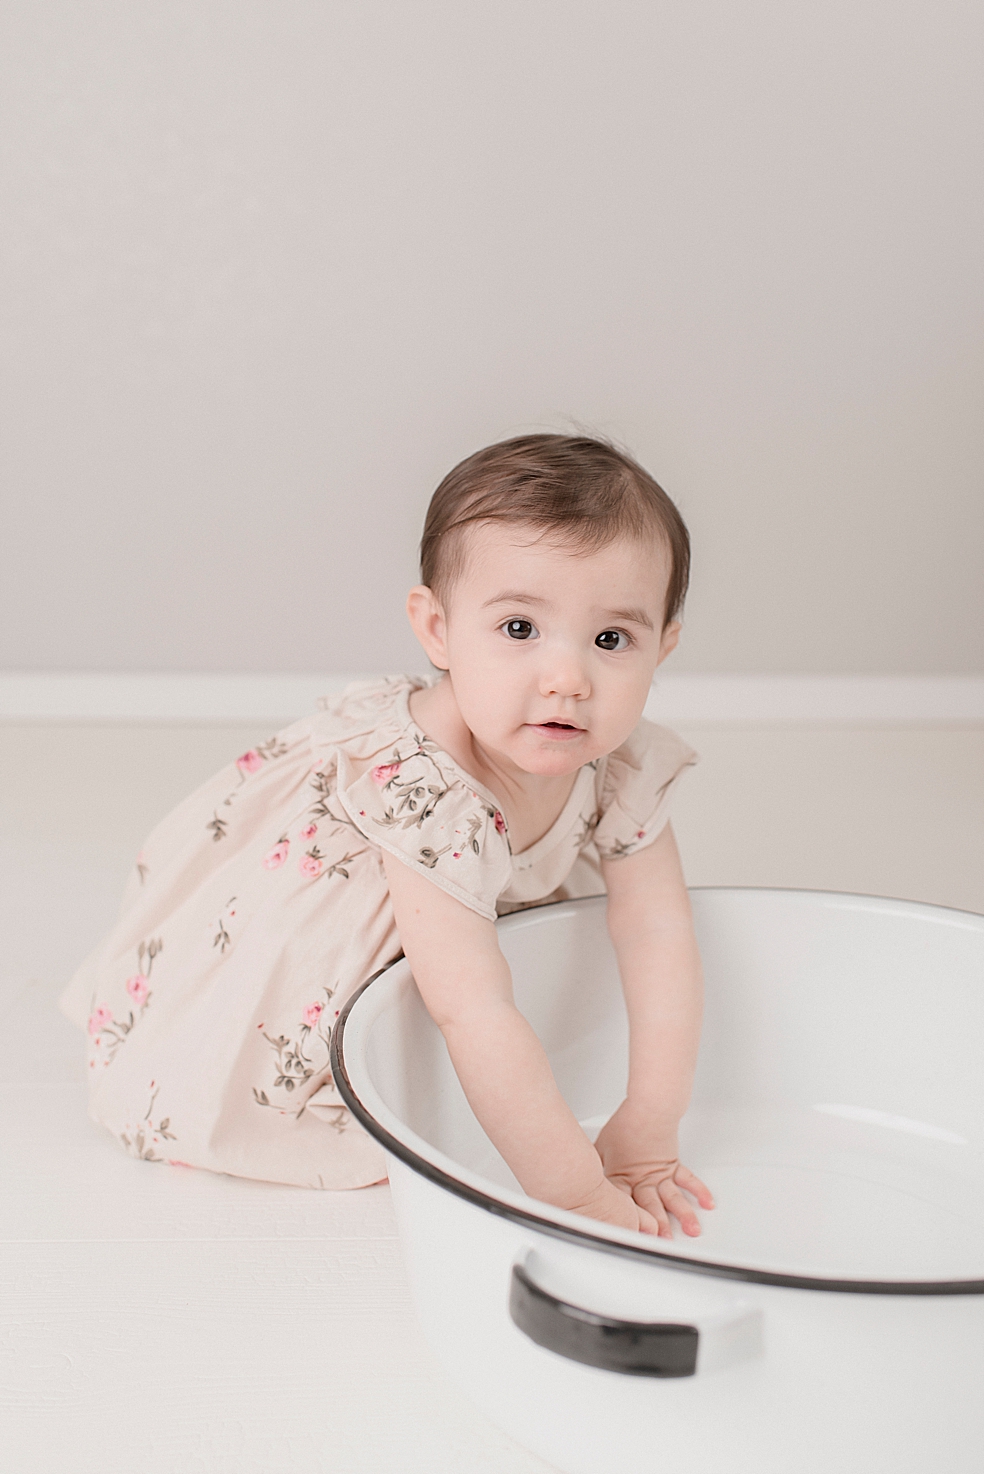 Baby girl in a floral print dress playing with a bowl | Photo by Jessica Lee Photography